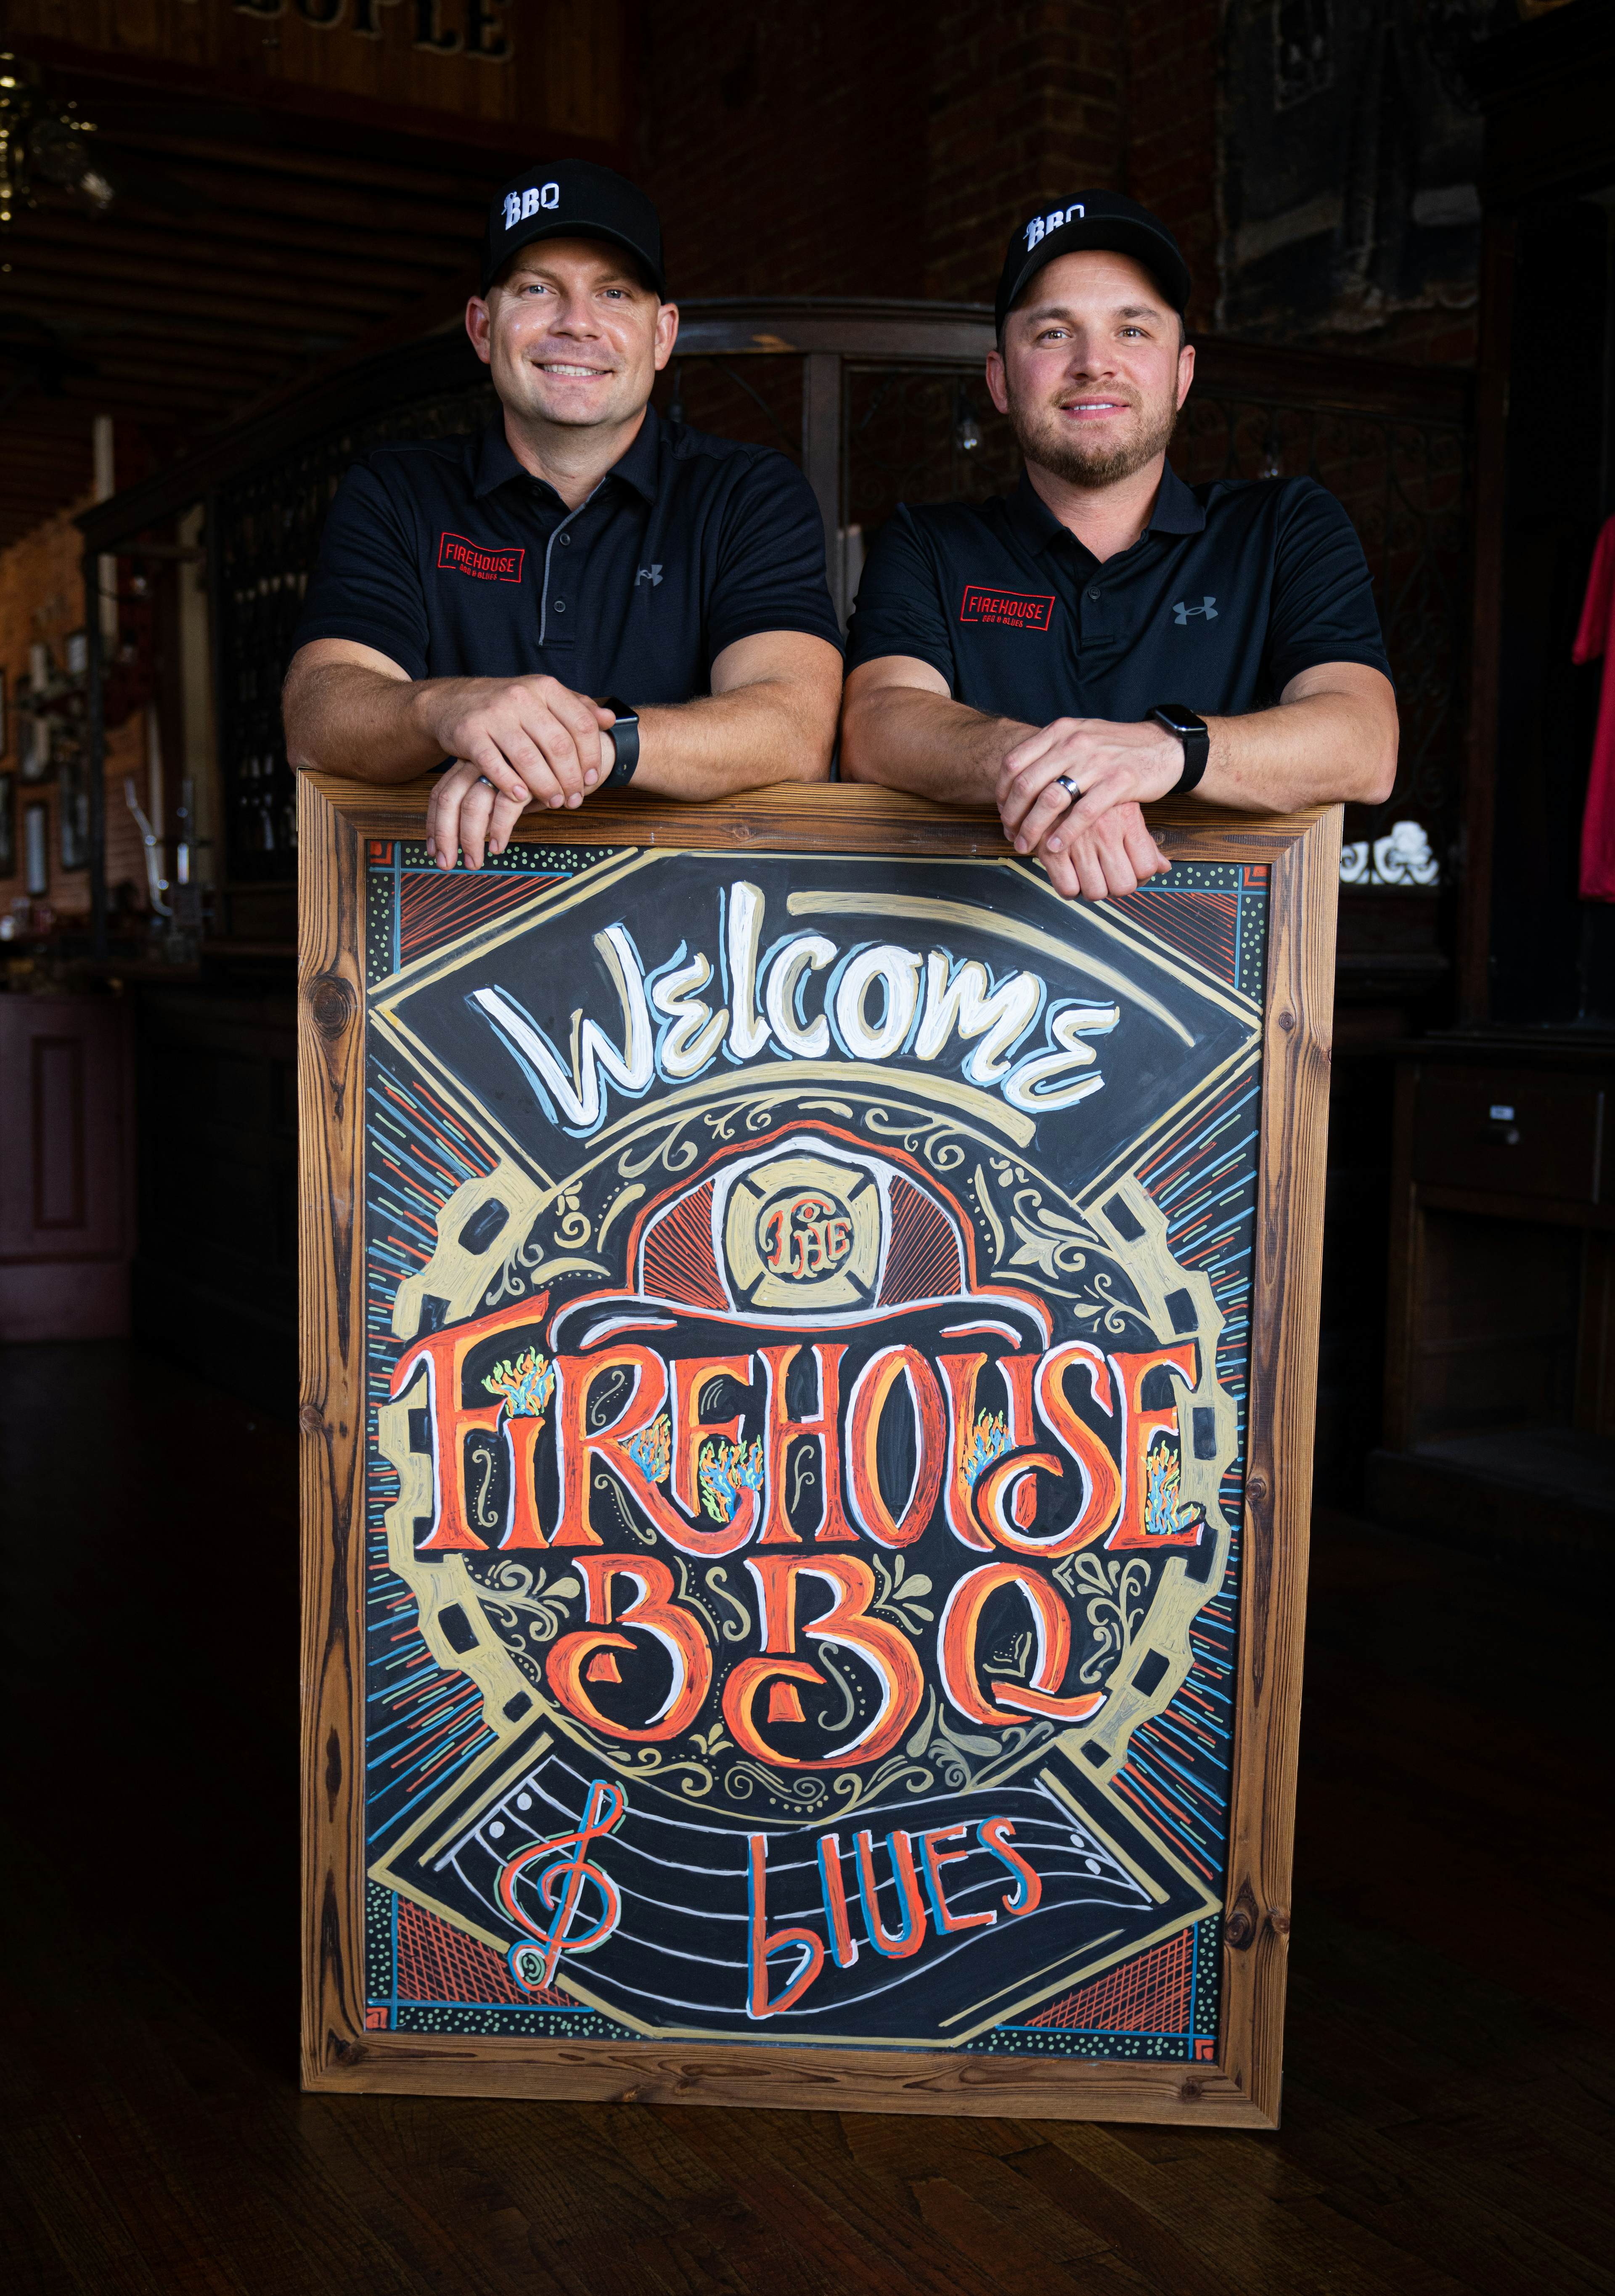 Nick Arbogast and Dustin Garvin standing behind the Firehouse BBQ & Blues welcome sign